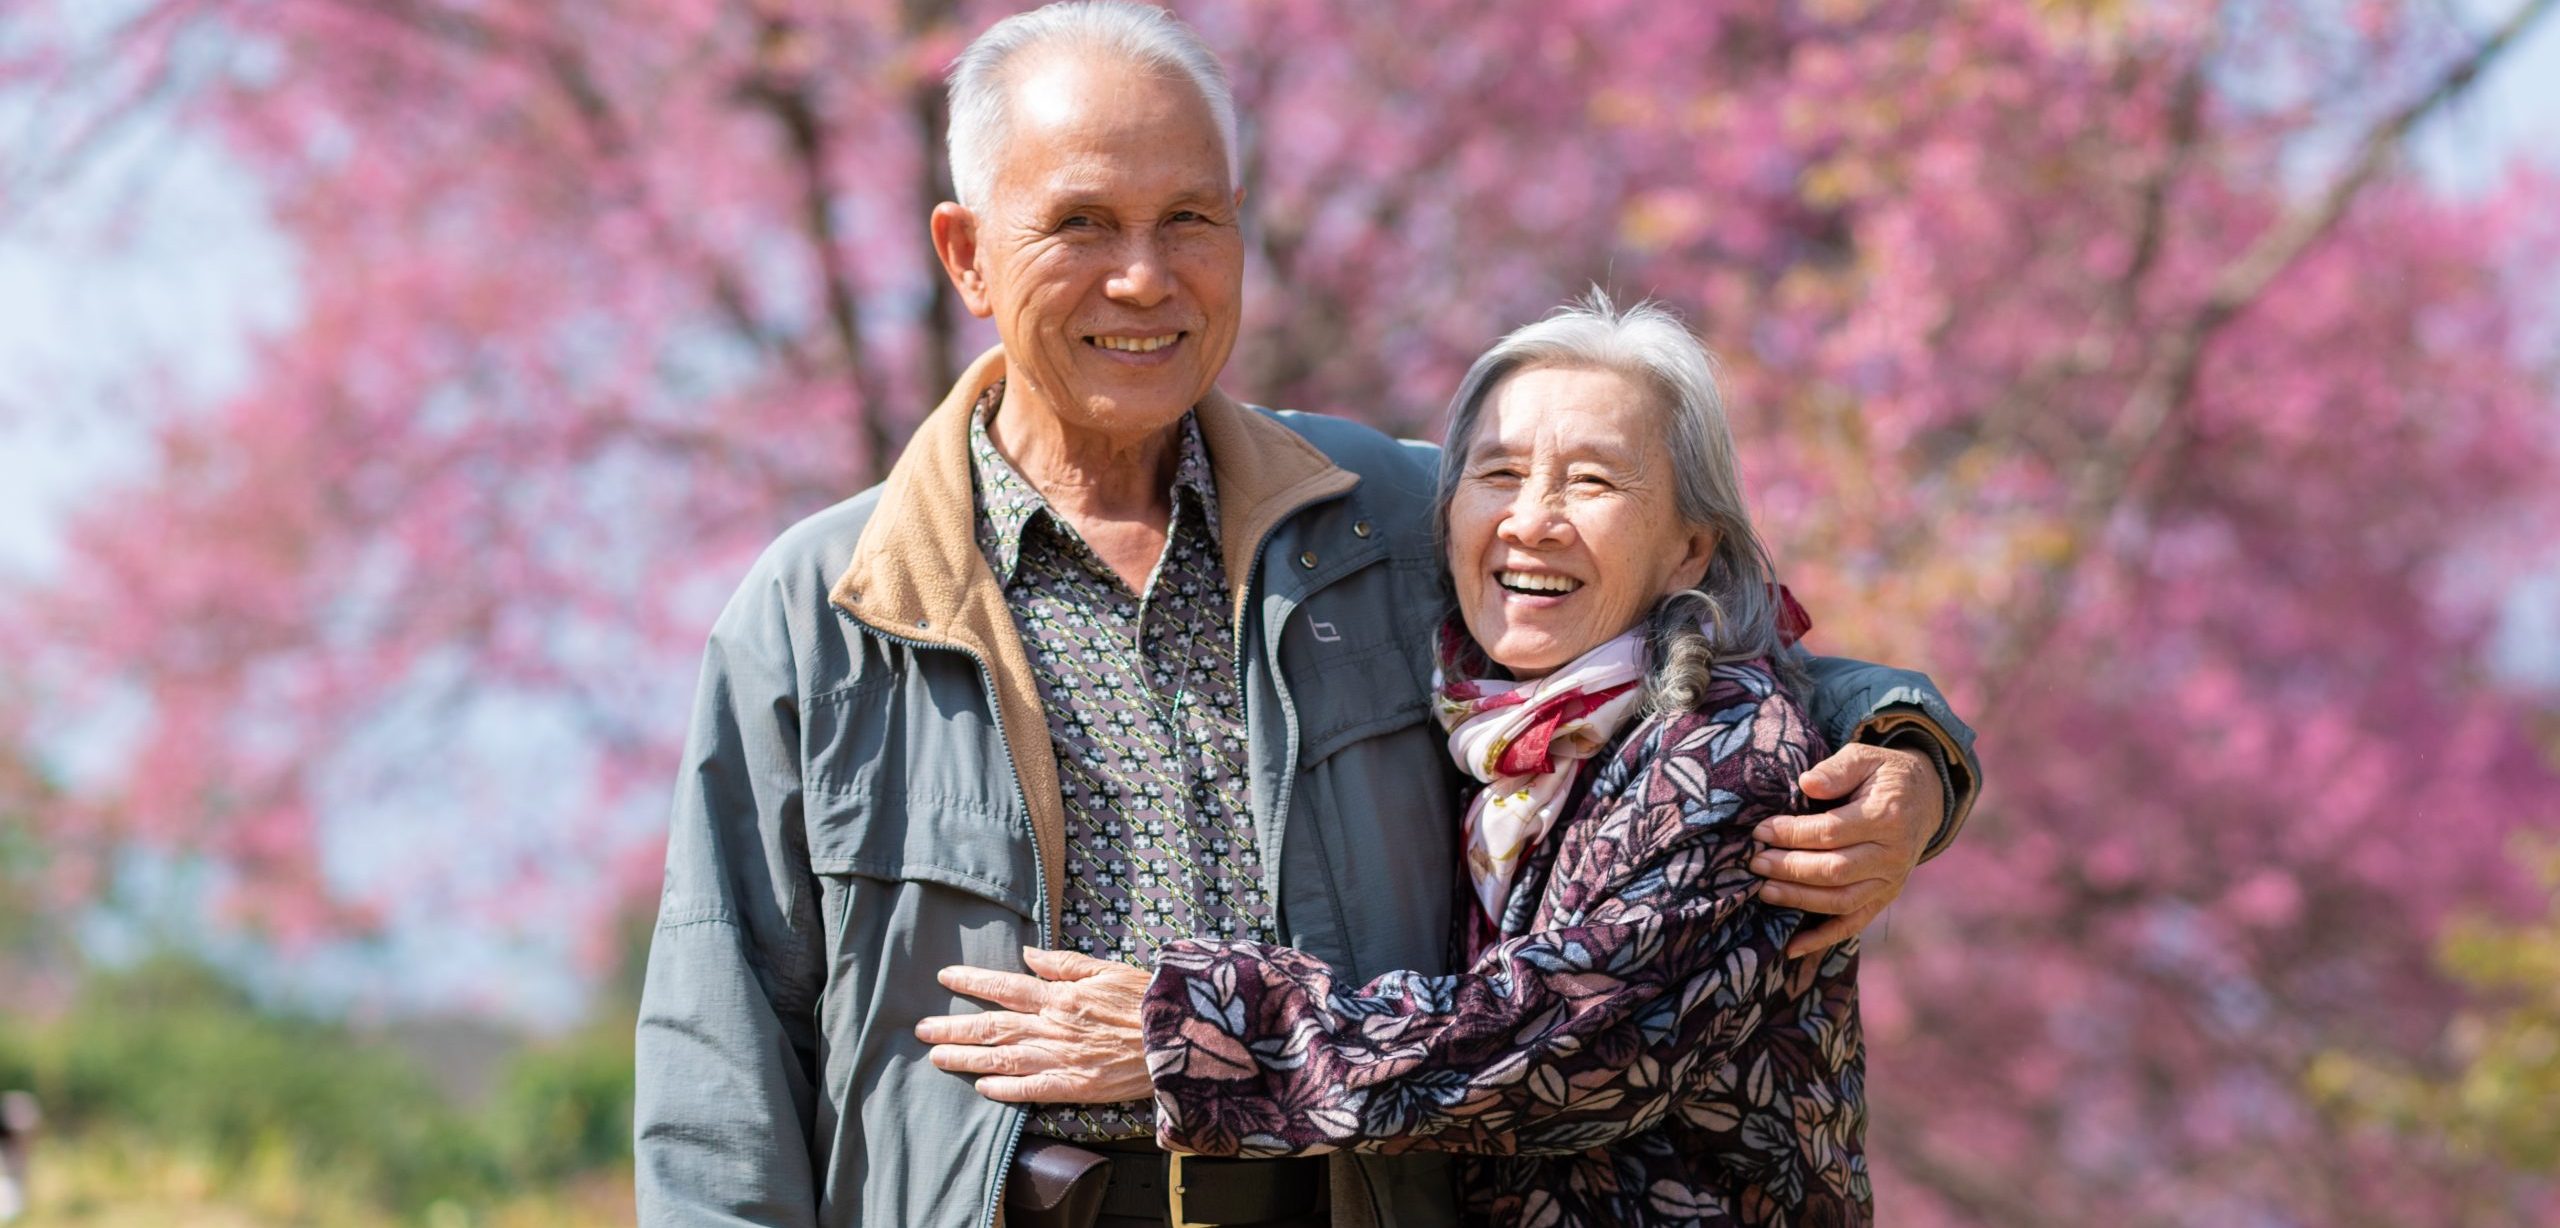 Happy old couple smiling in a park.